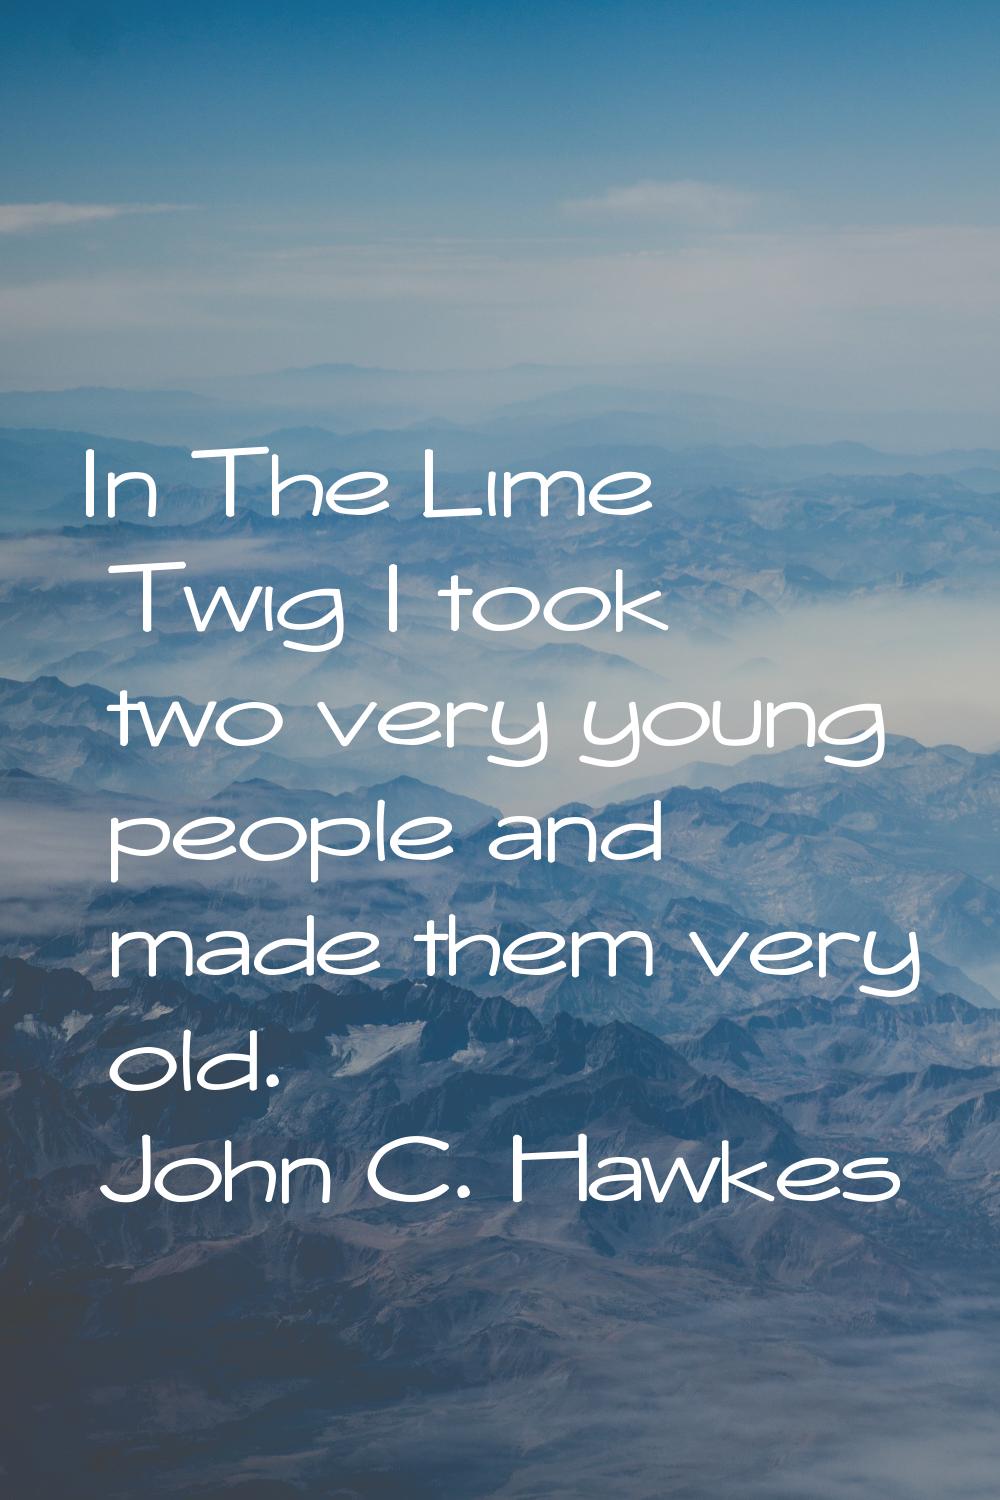 In The Lime Twig I took two very young people and made them very old.